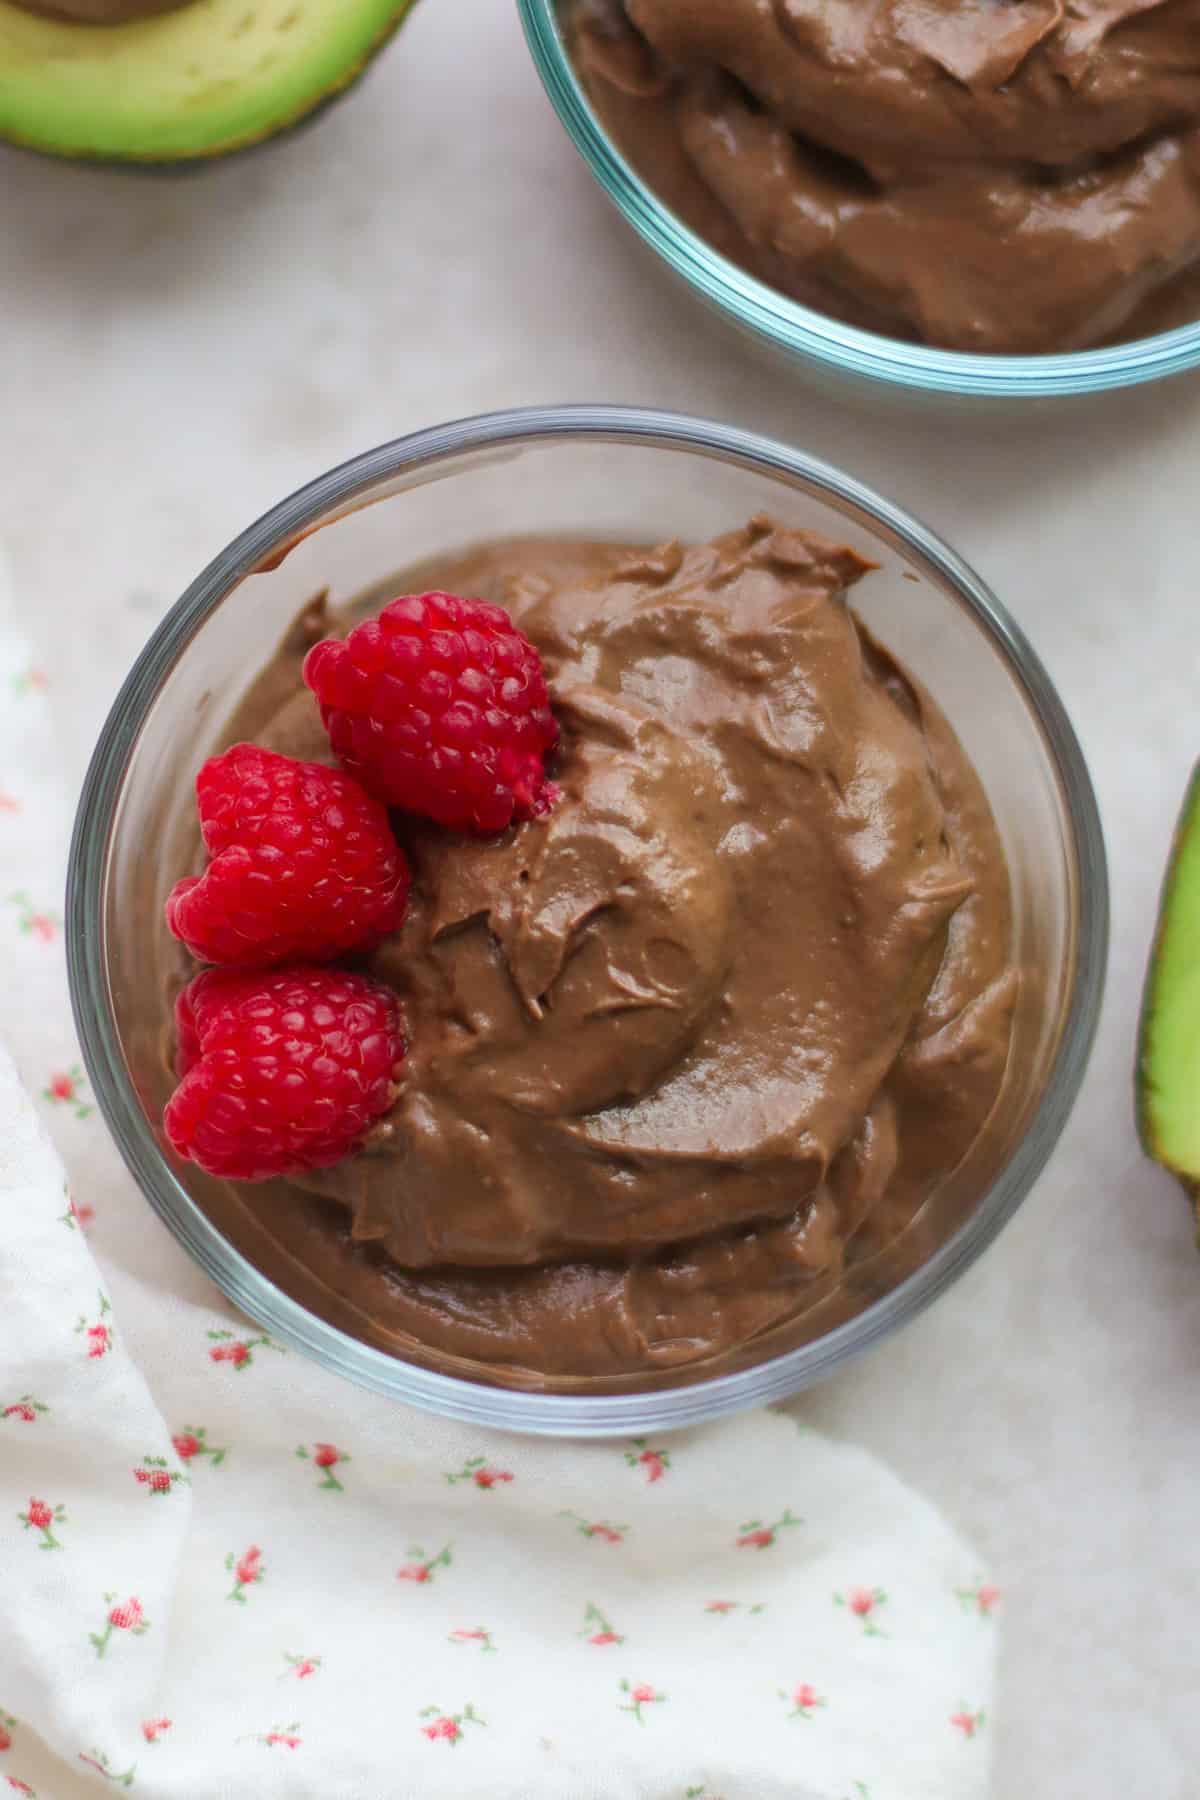 A close up overhead shot of chocolate pudding in a glass bowl with three raspberries.